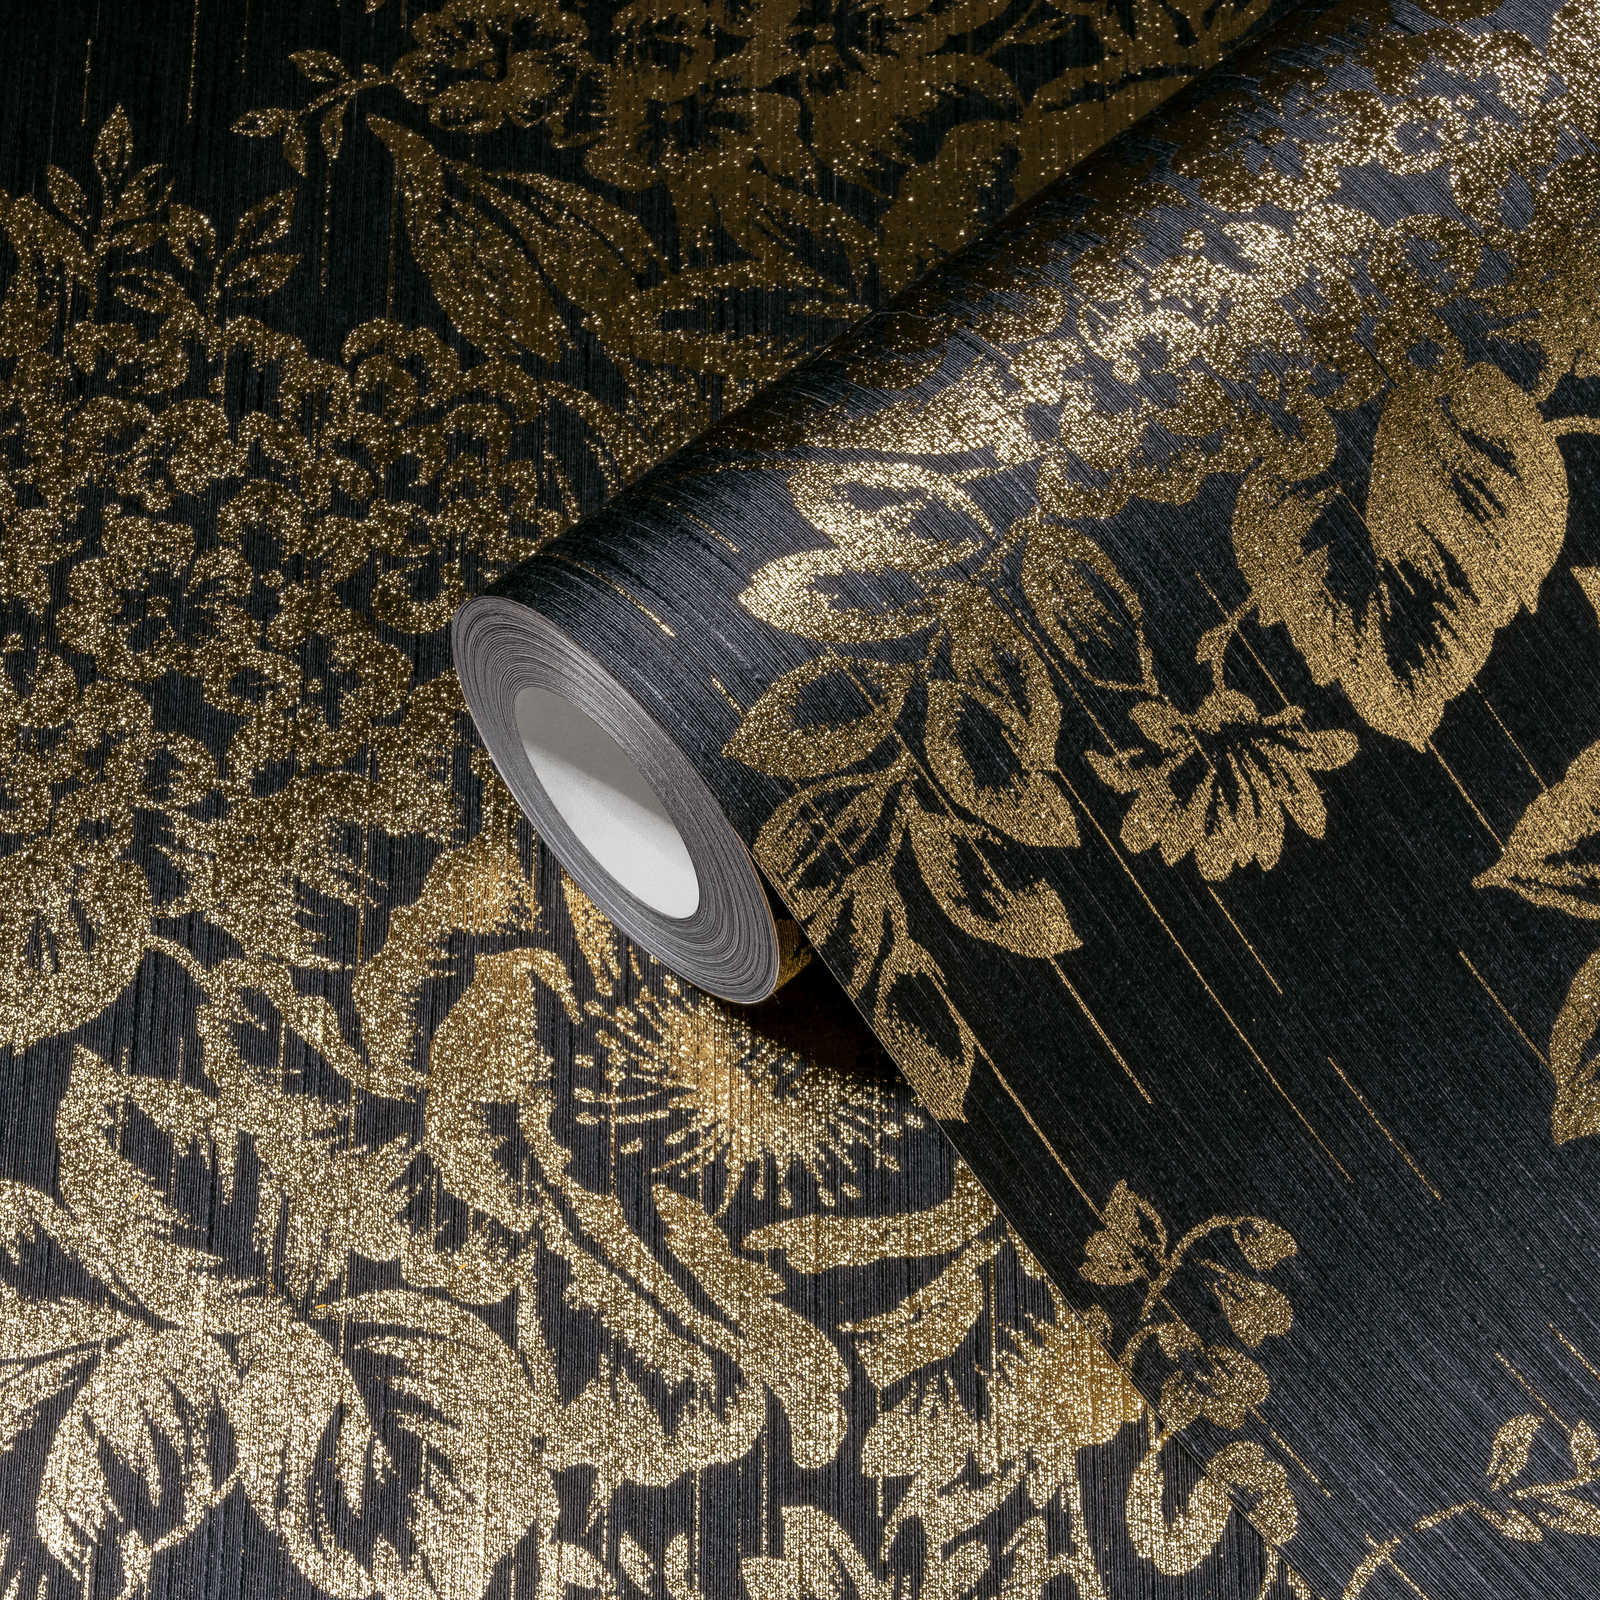             Textured wallpaper with golden floral pattern - gold, black
        